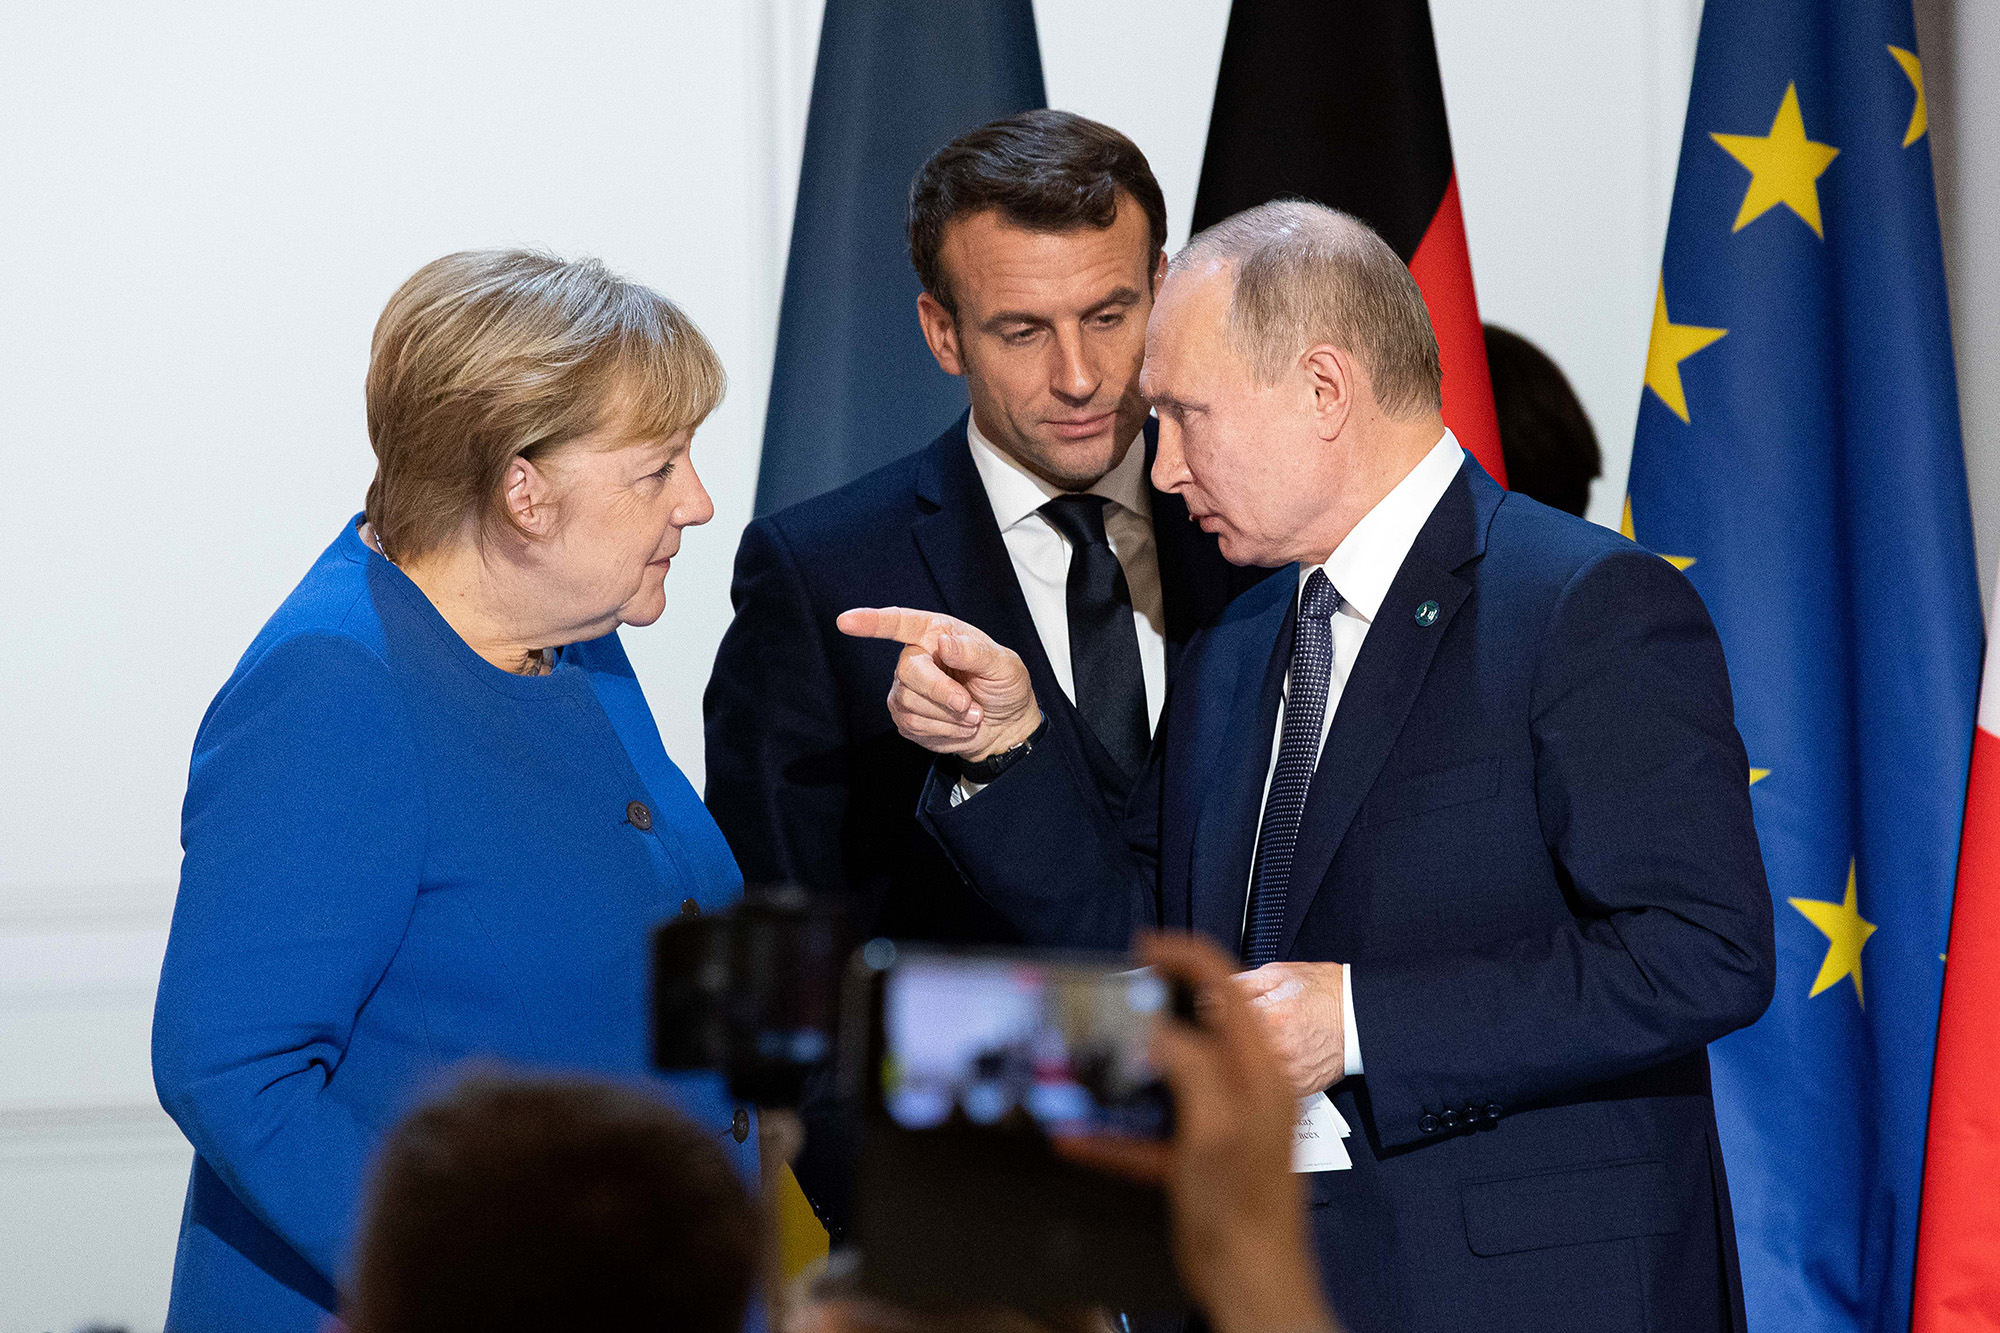 Vladimir Putin, Russia's president, right, gestures to Angela Merkel, Germany's chancellor, left, while Emmanuel Macron, France's president, looks on as they depart a news conference following a 4-way summit on Ukraine at Elysee Palace in Paris, France, on December 9, 2019.